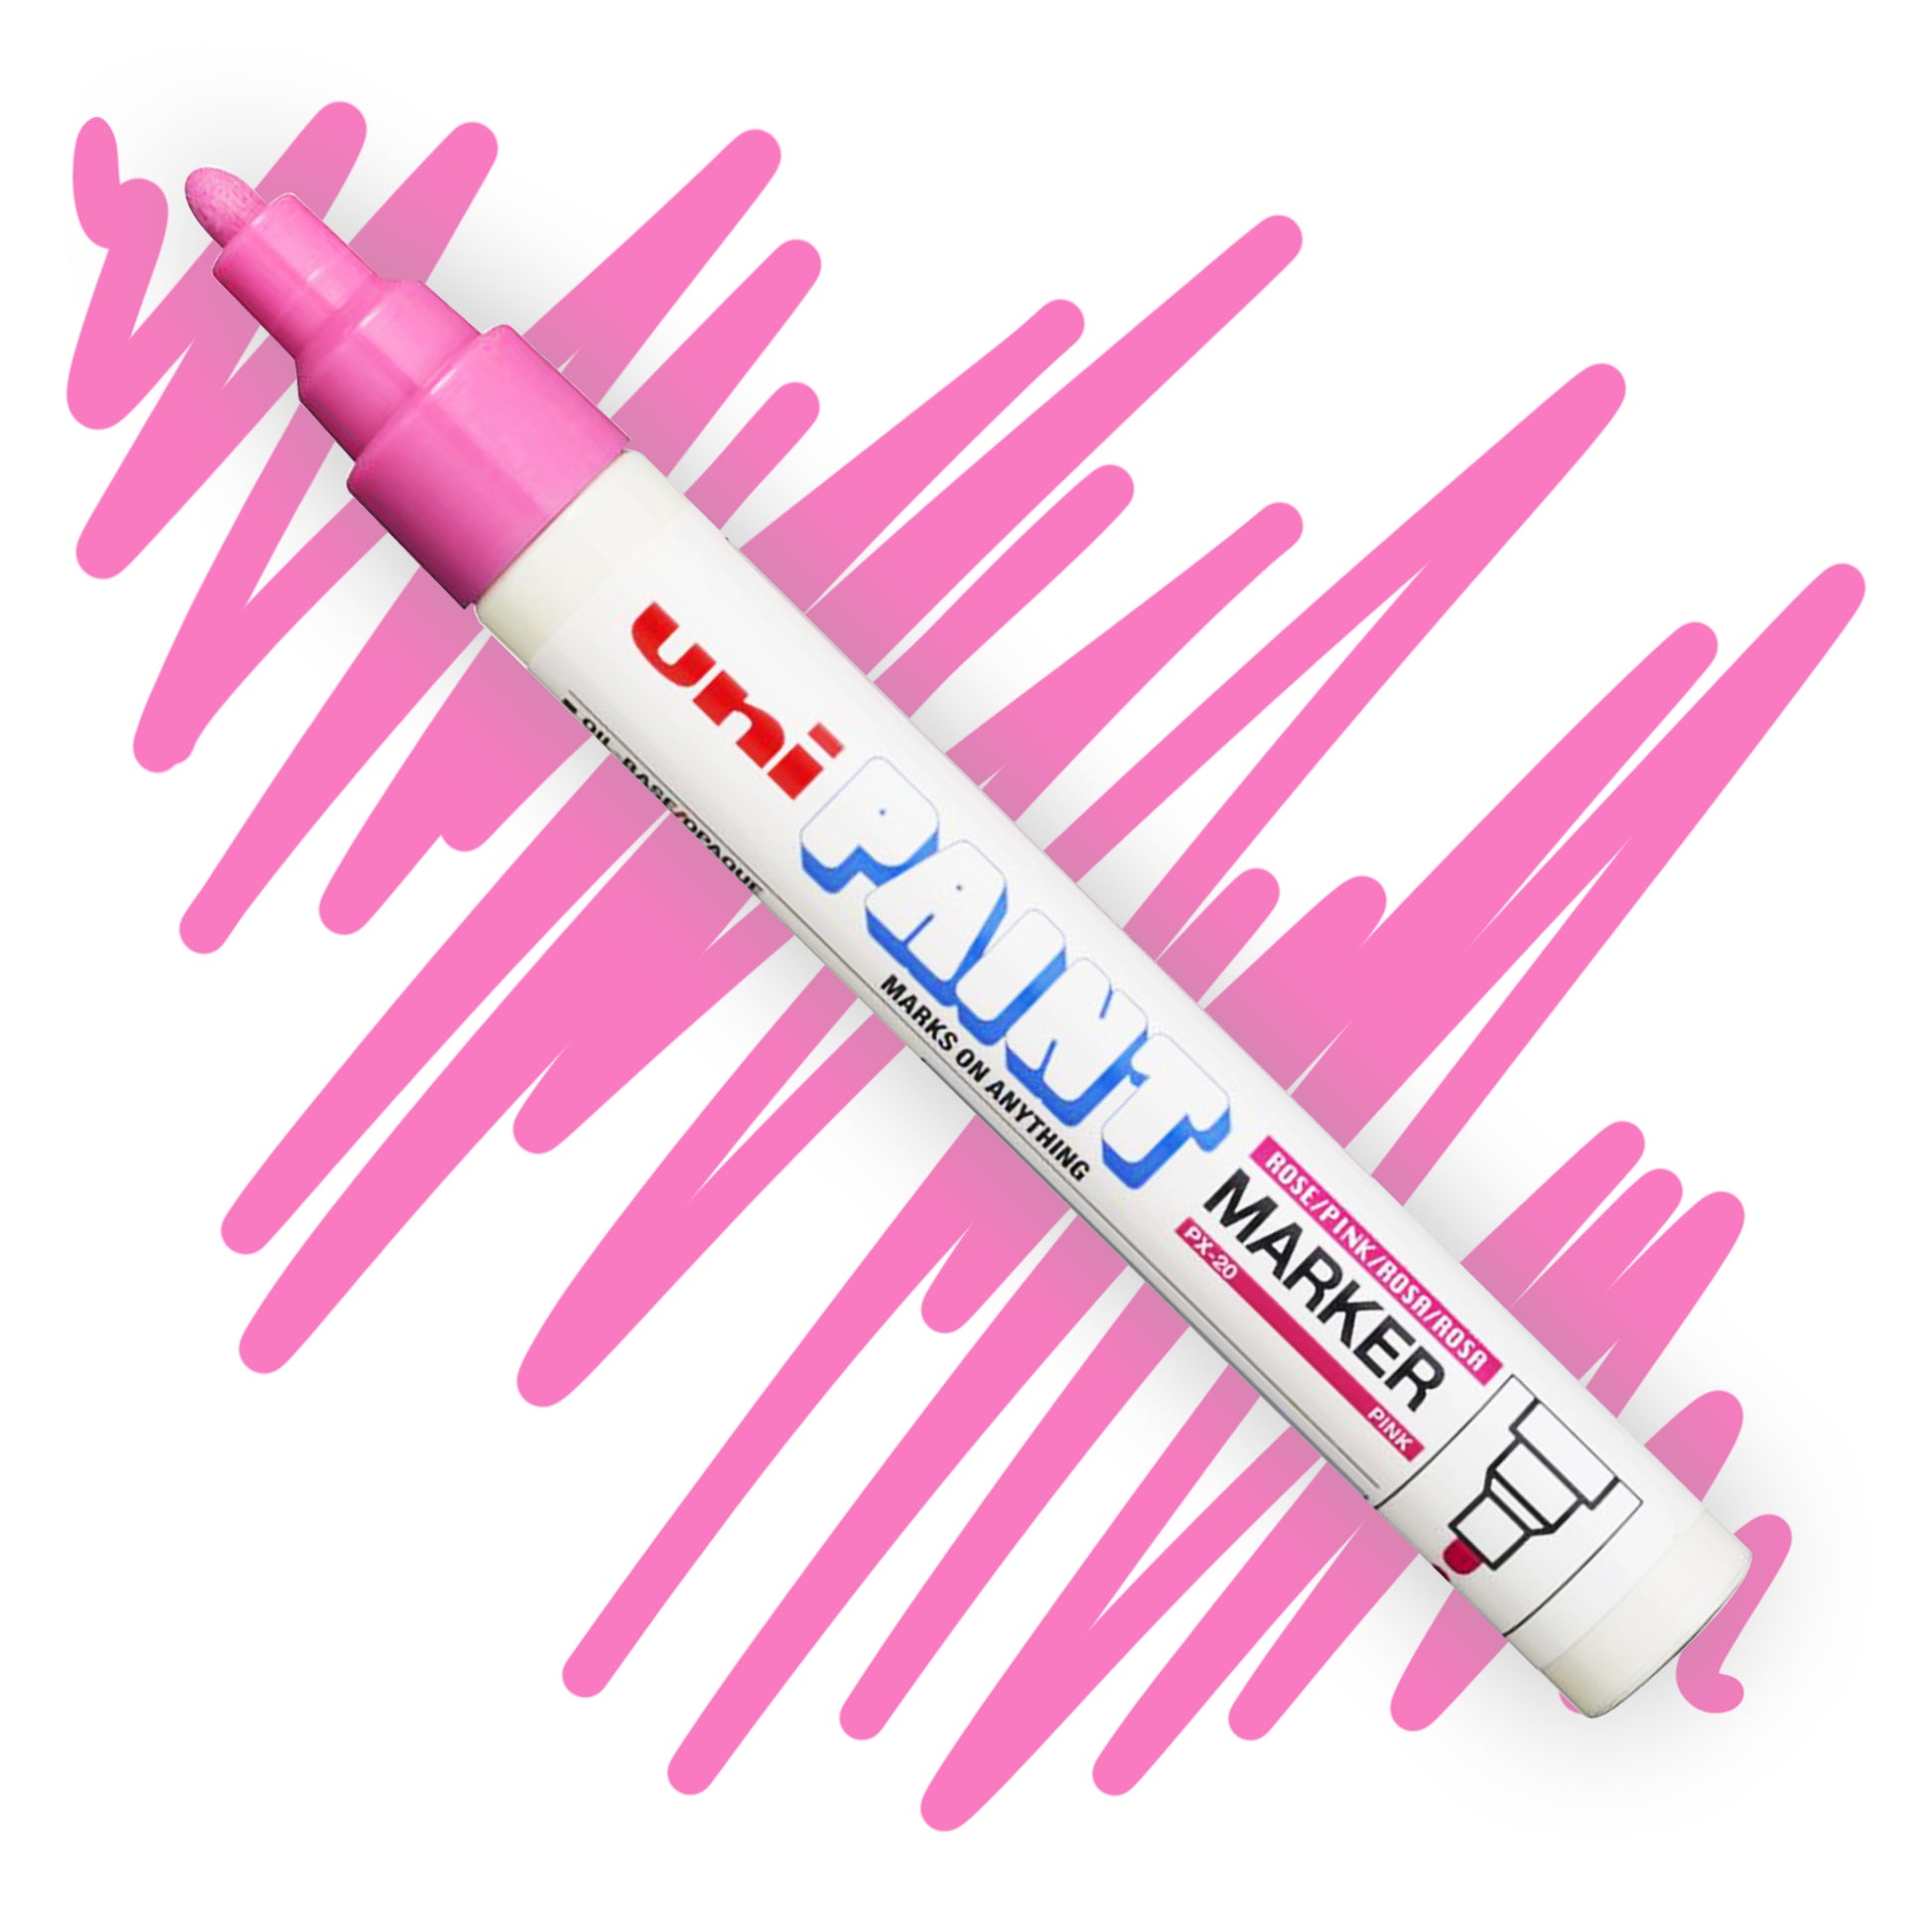 A white marker angled diagonally, the tip of the marker and the nib are colored pink. On the marker body the label reads "Uni PAINT Maker". Behind the marker is a color swatch of a squiggly line in pink..